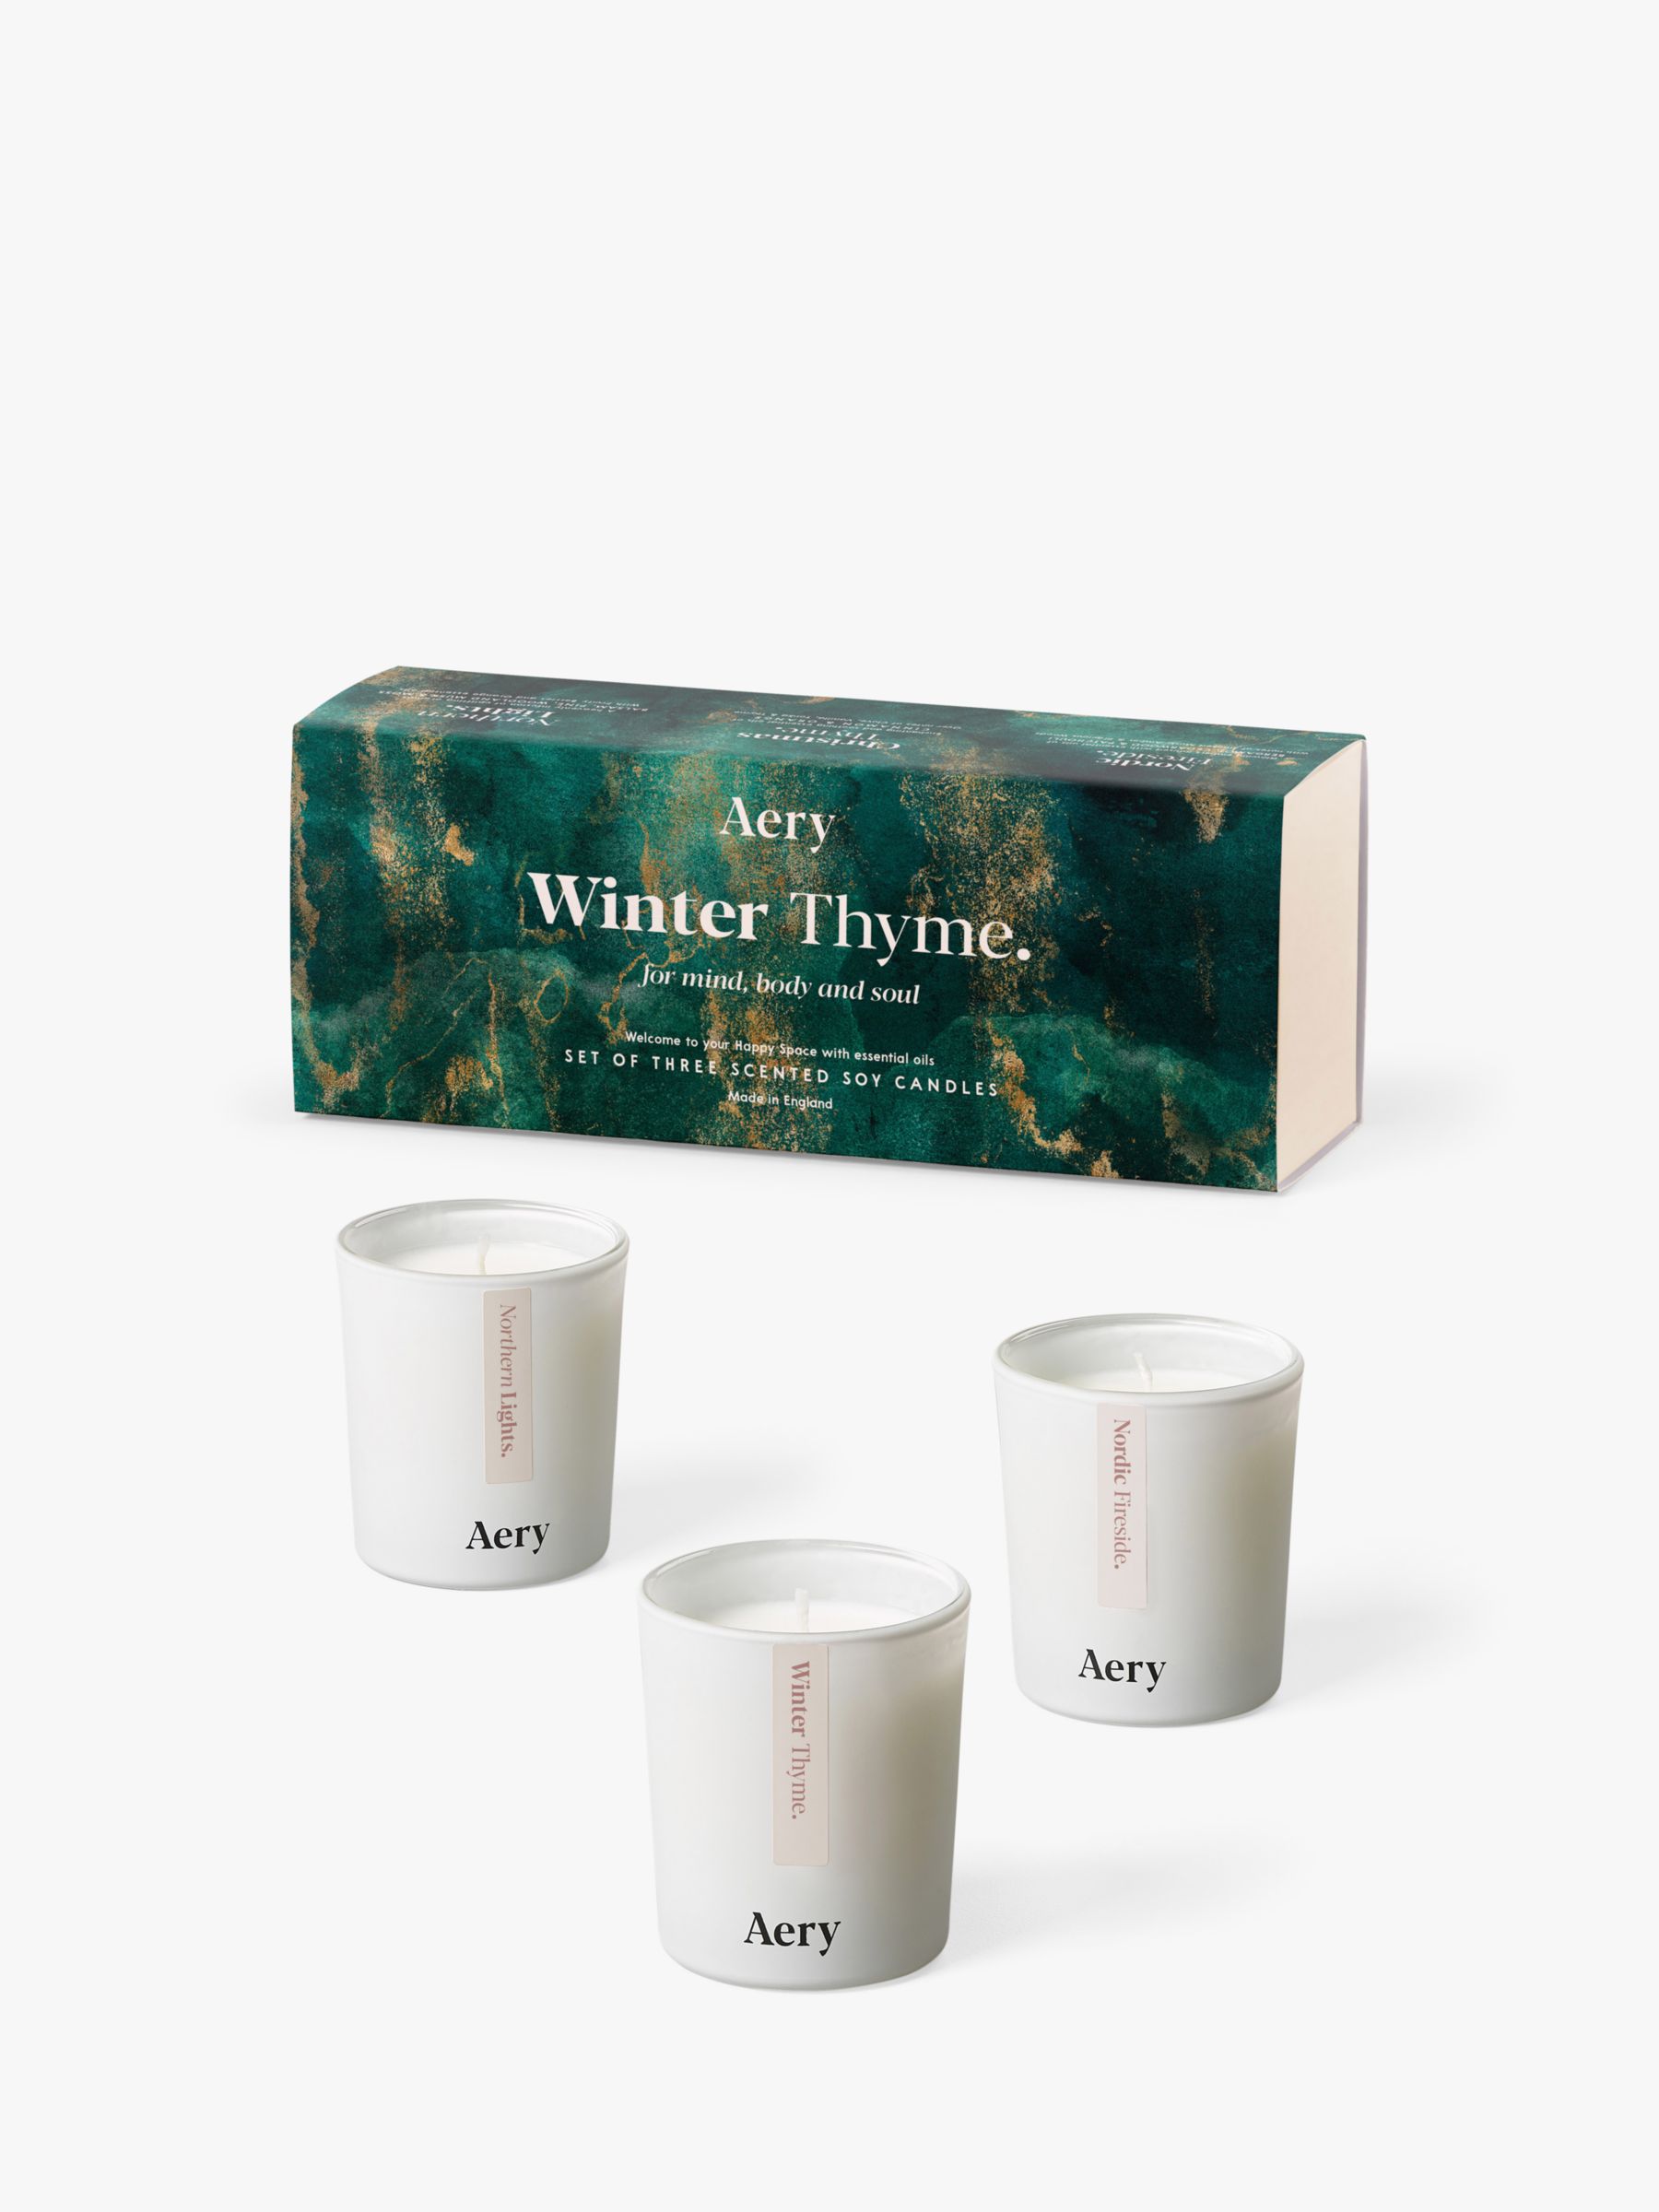 Aery Winter Thyme Mini Candles Gift Set